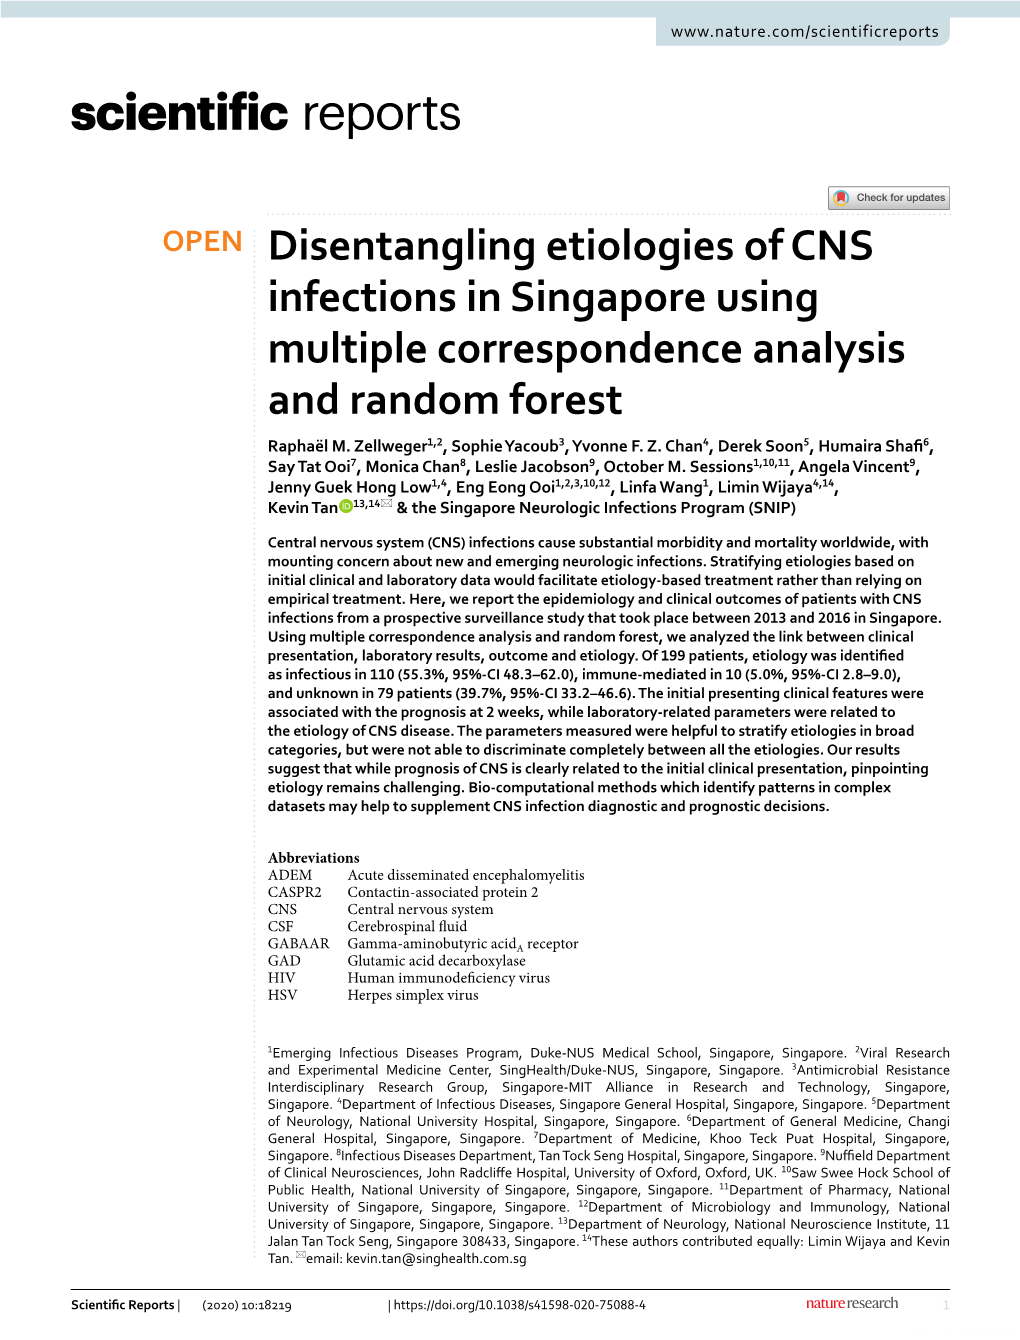 Disentangling Etiologies of CNS Infections in Singapore Using Multiple Correspondence Analysis and Random Forest Raphaël M